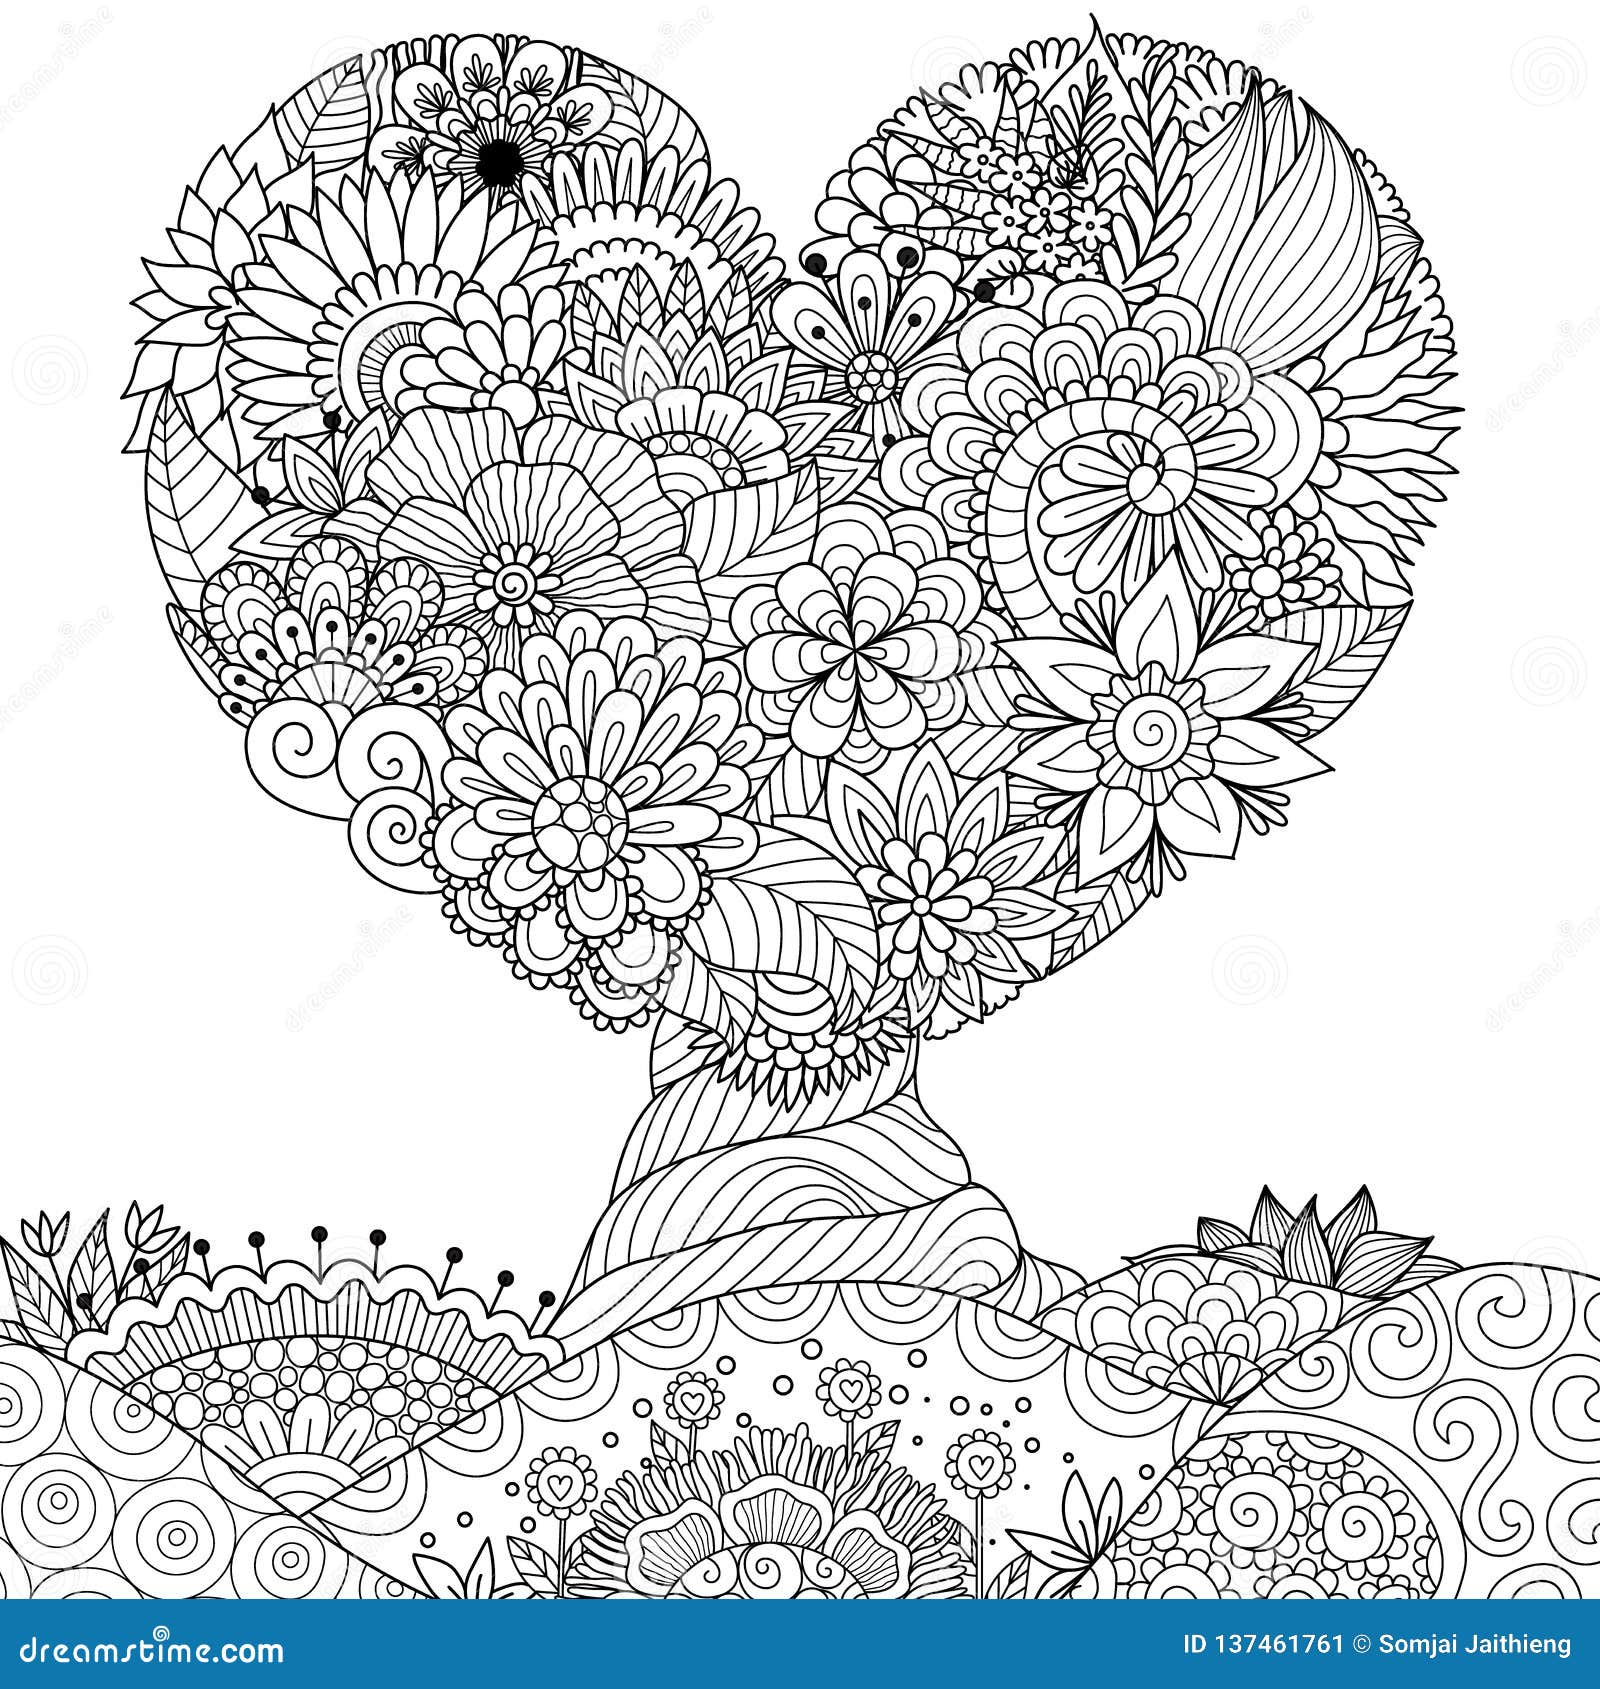 hearted  tree for lace, valentines card,wall sticker,coloring book, coloring page and other  .  illustrati